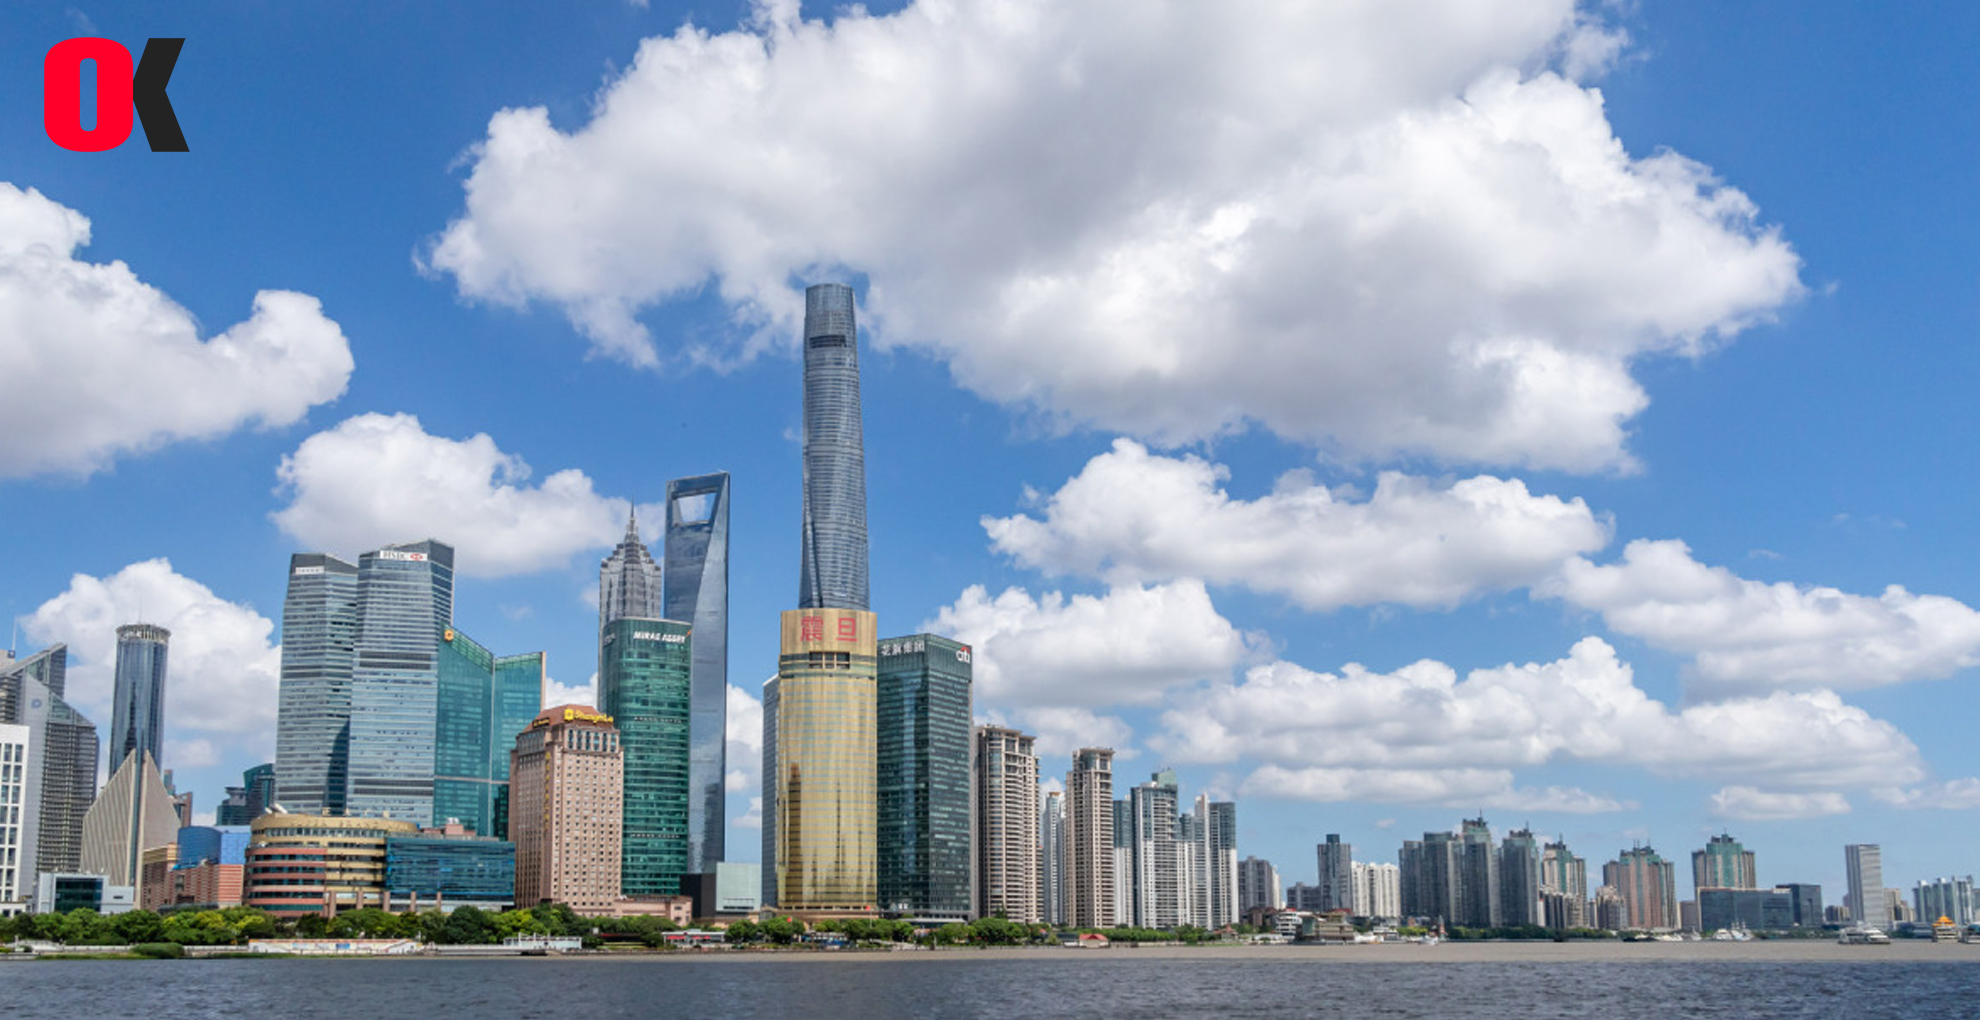 Shanghai's new online economy is booming